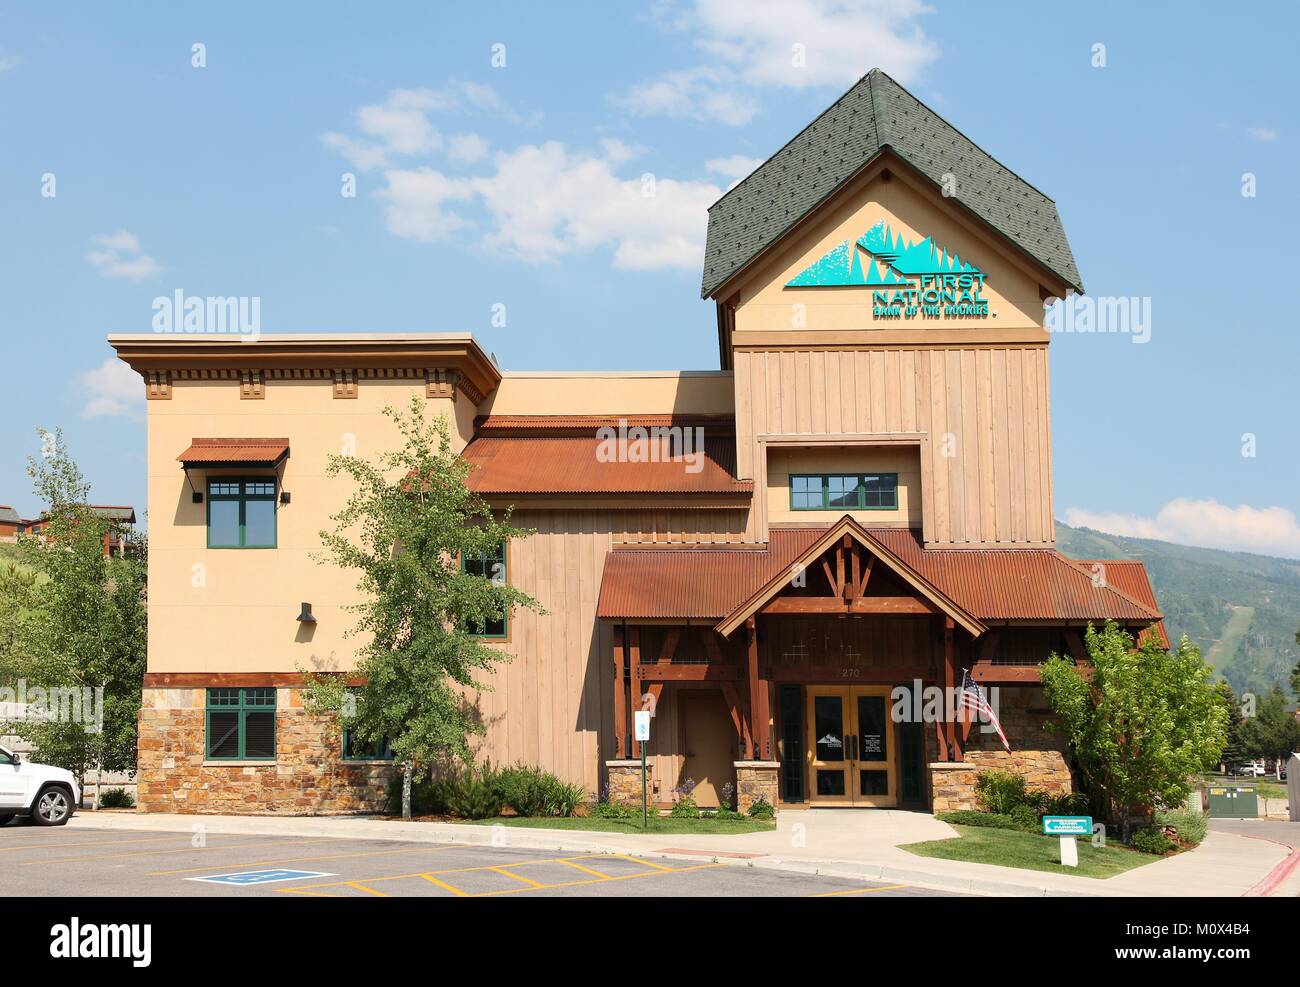 STEAMBOAT SPRINGS, COLORADO - JUNE 19: First National Bank of the Rockies on June 19, 2013 in Steamboat Springs, Colorado. FNBR exists since 1904 and  Stock Photo